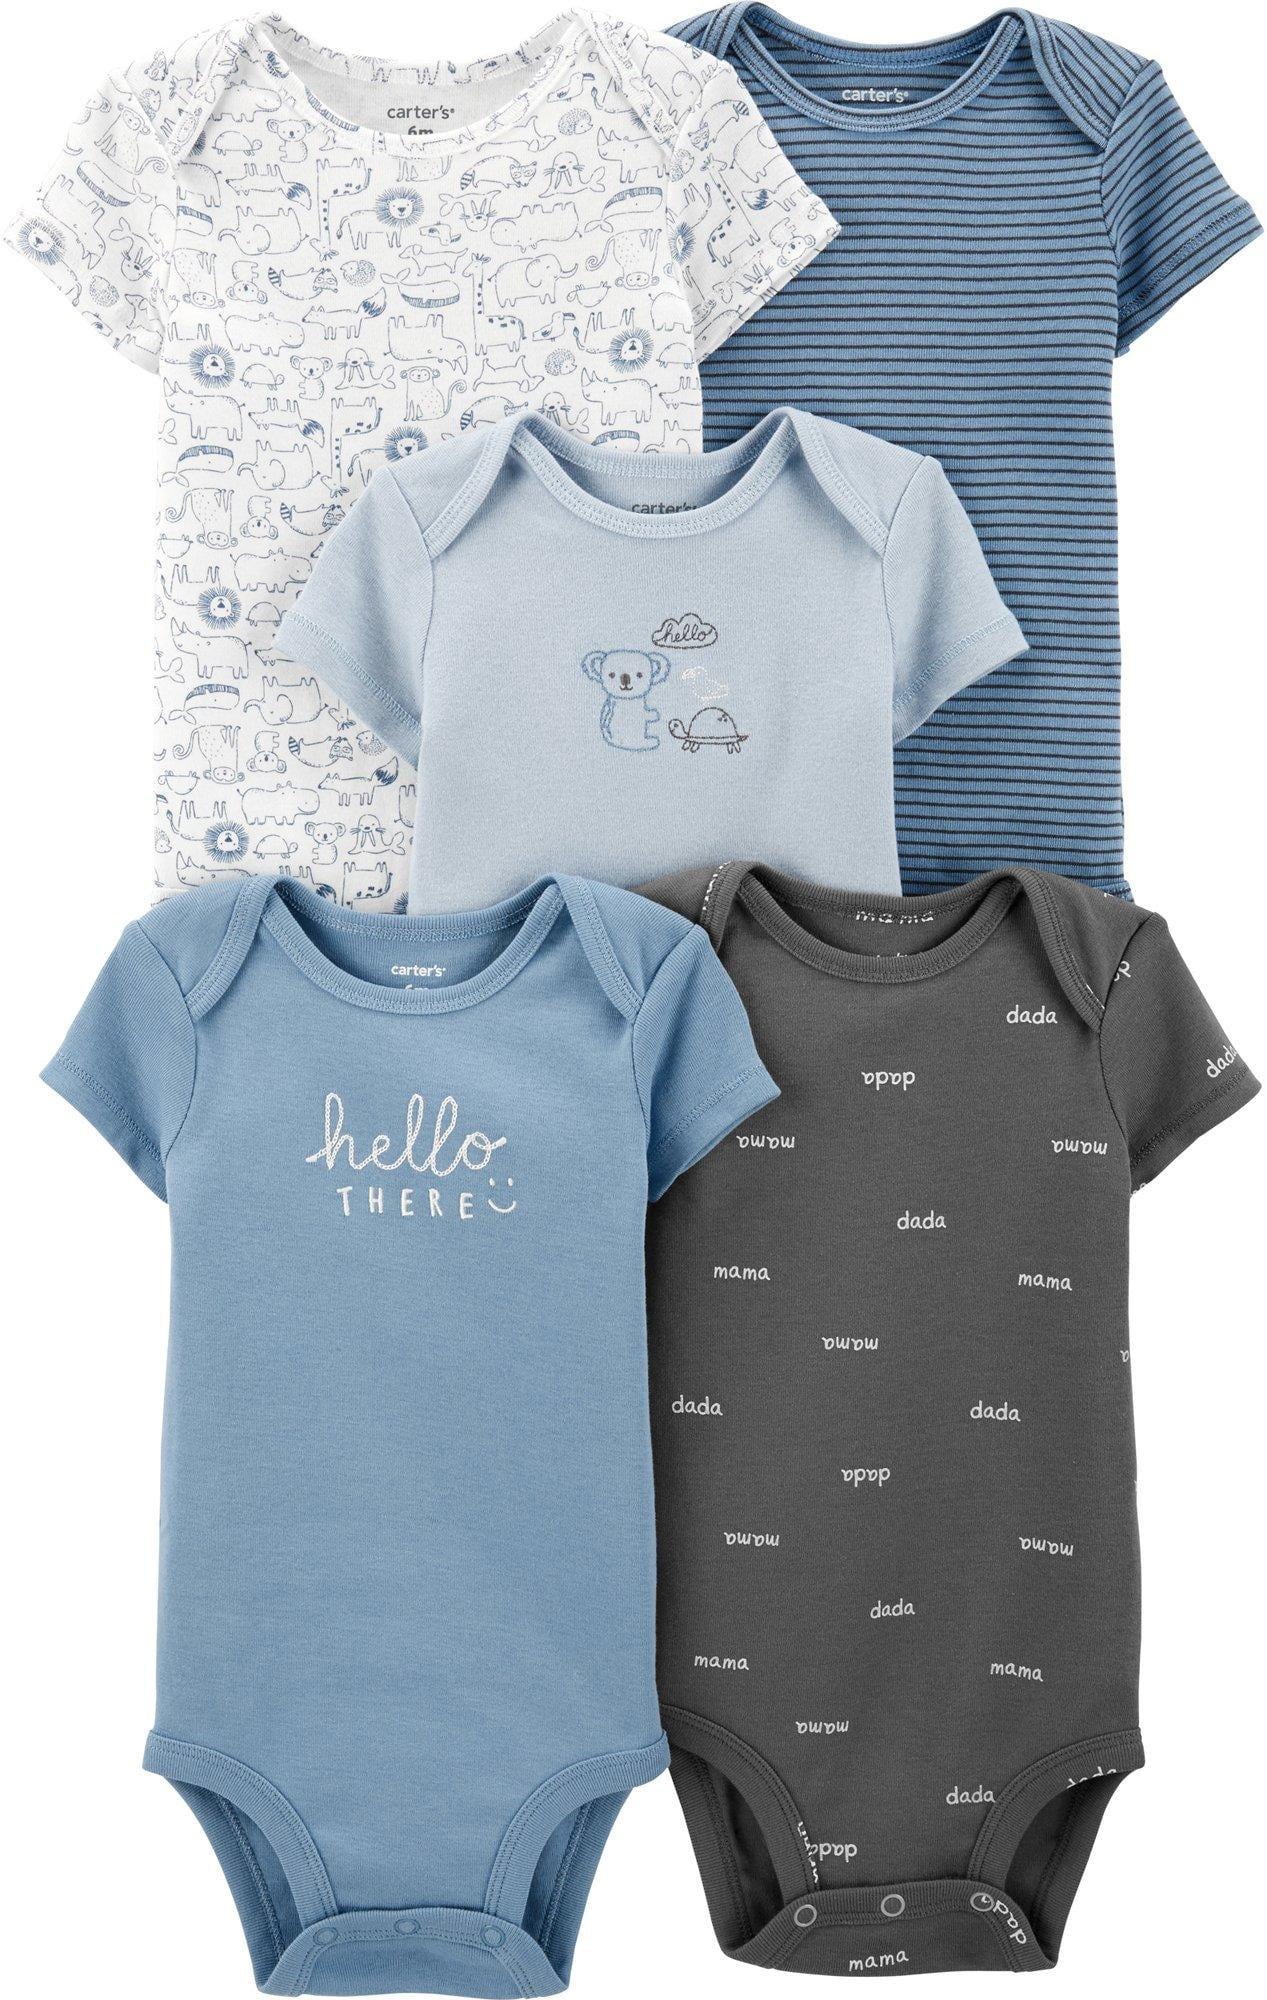 carters baby shirts